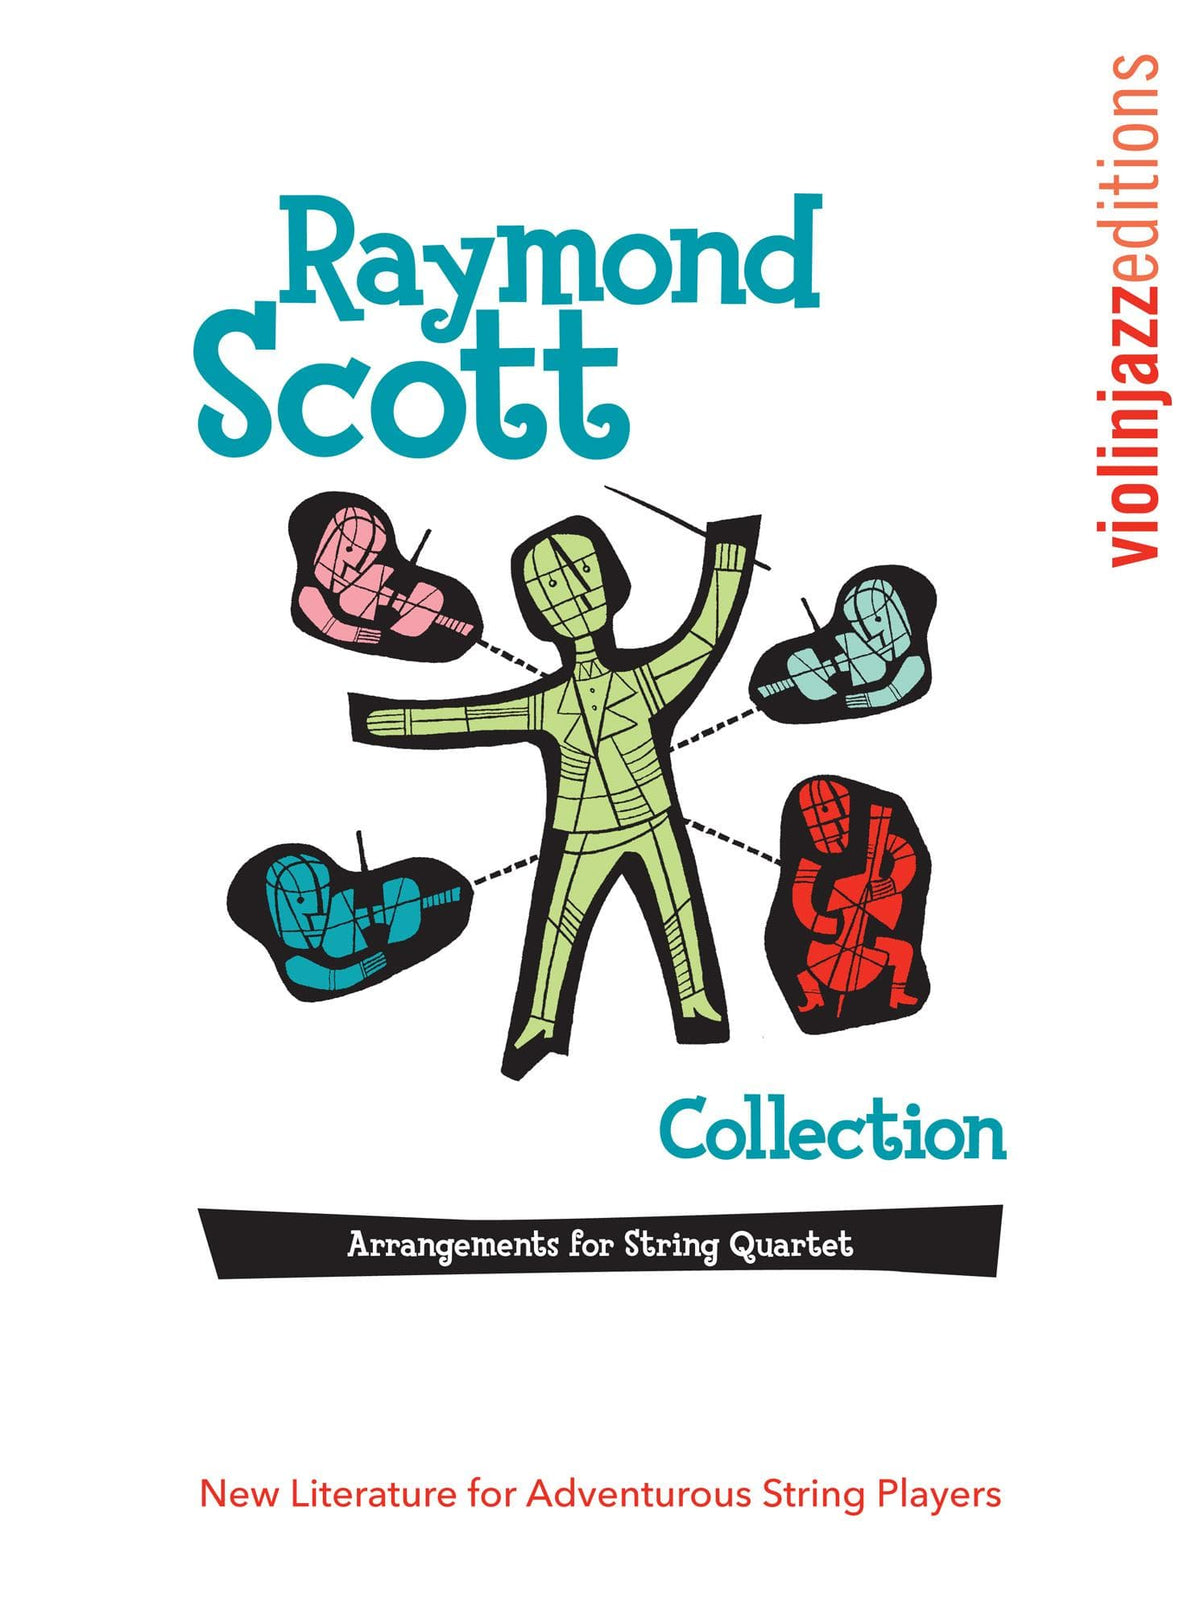 Scott, Raymond - Powerhouse, The Penguin, Siberian Sleighride, and Toy Trumpet - Raymond Scott Collection - for String Quartet - arranged by Jeremy Cohen - Violinjazz Editions